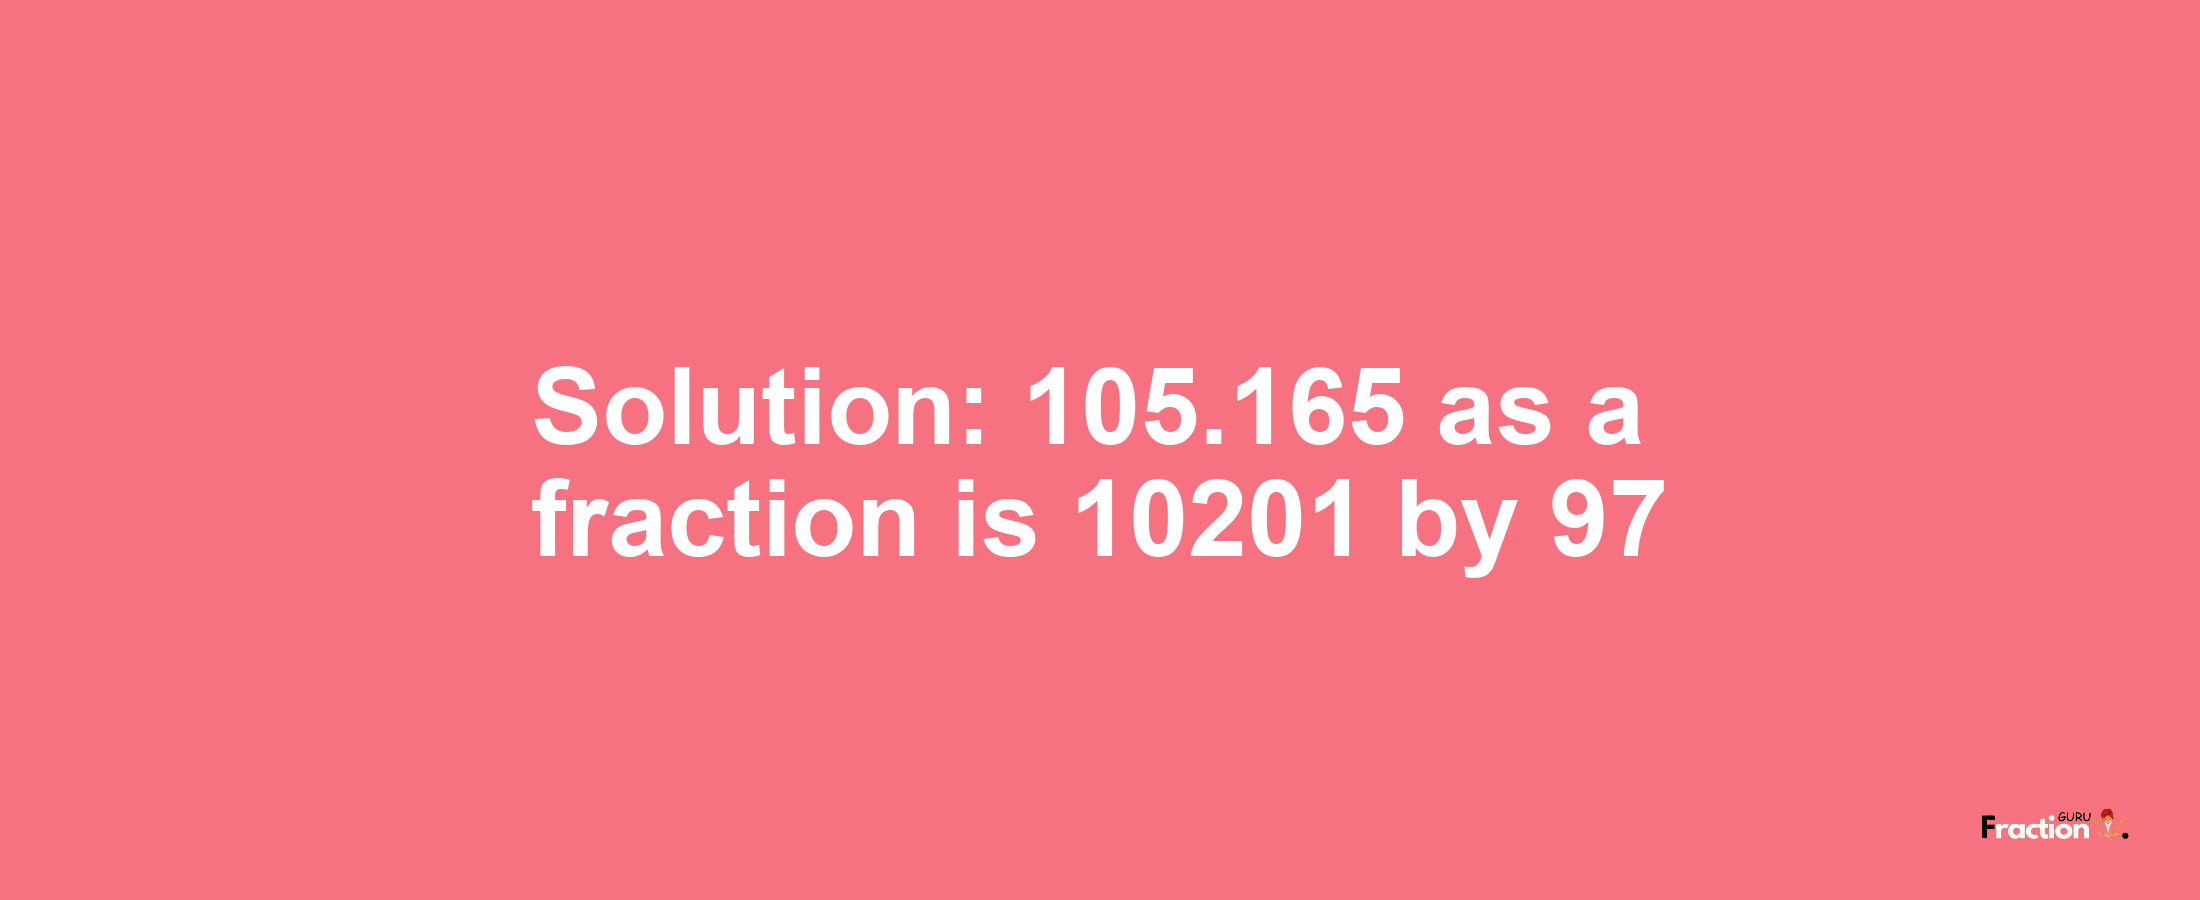 Solution:105.165 as a fraction is 10201/97